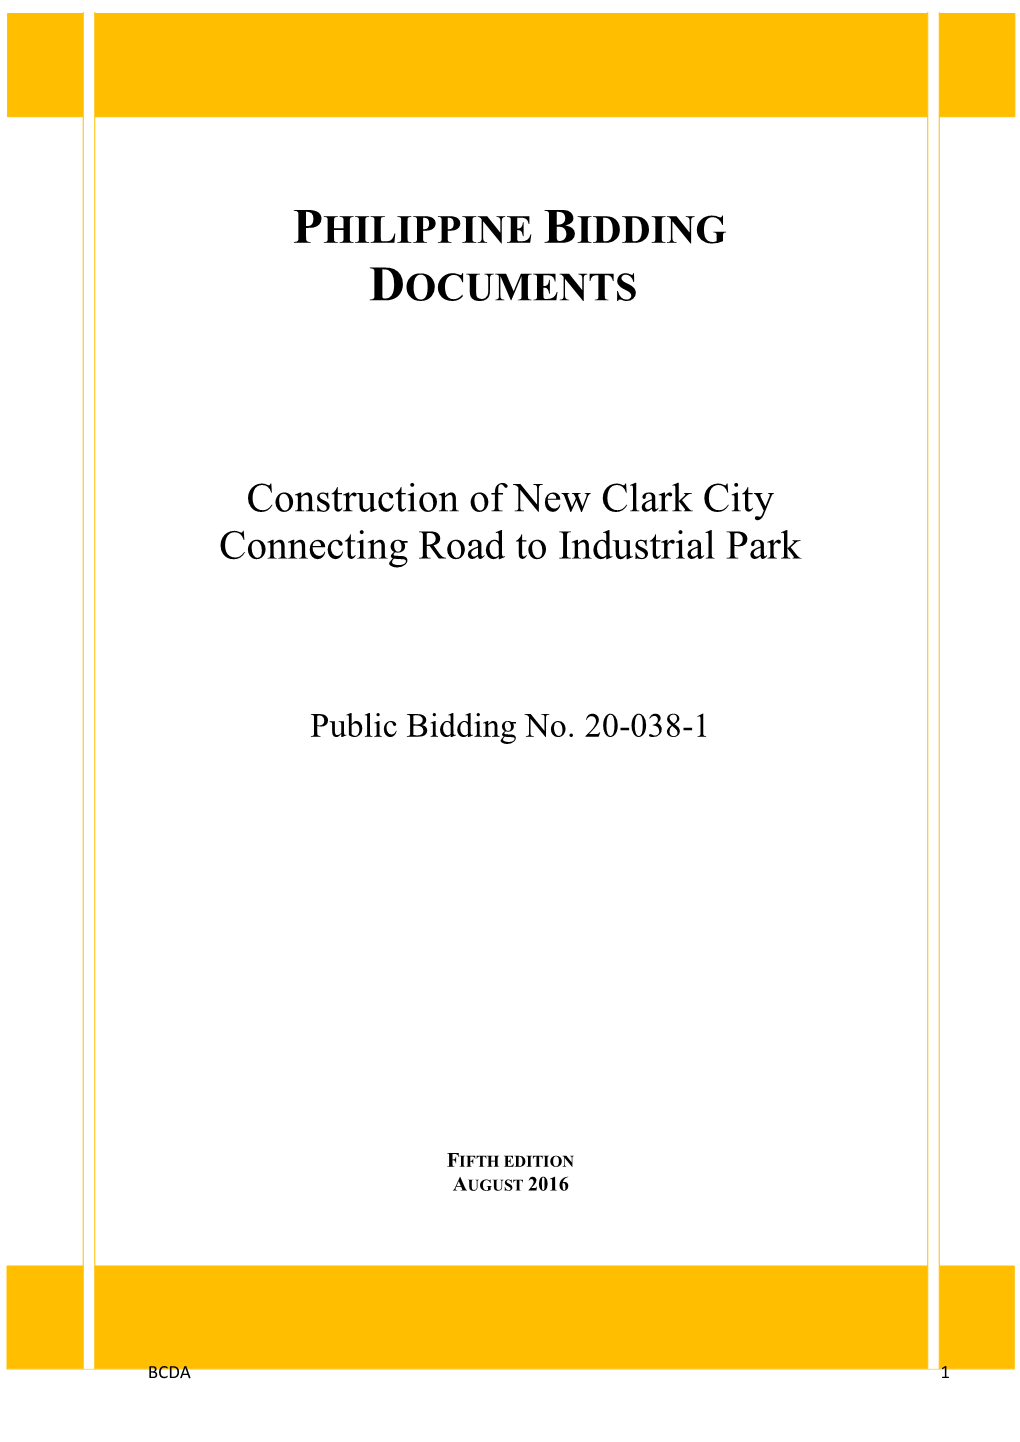 Construction of New Clark City Connecting Road to Industrial Park